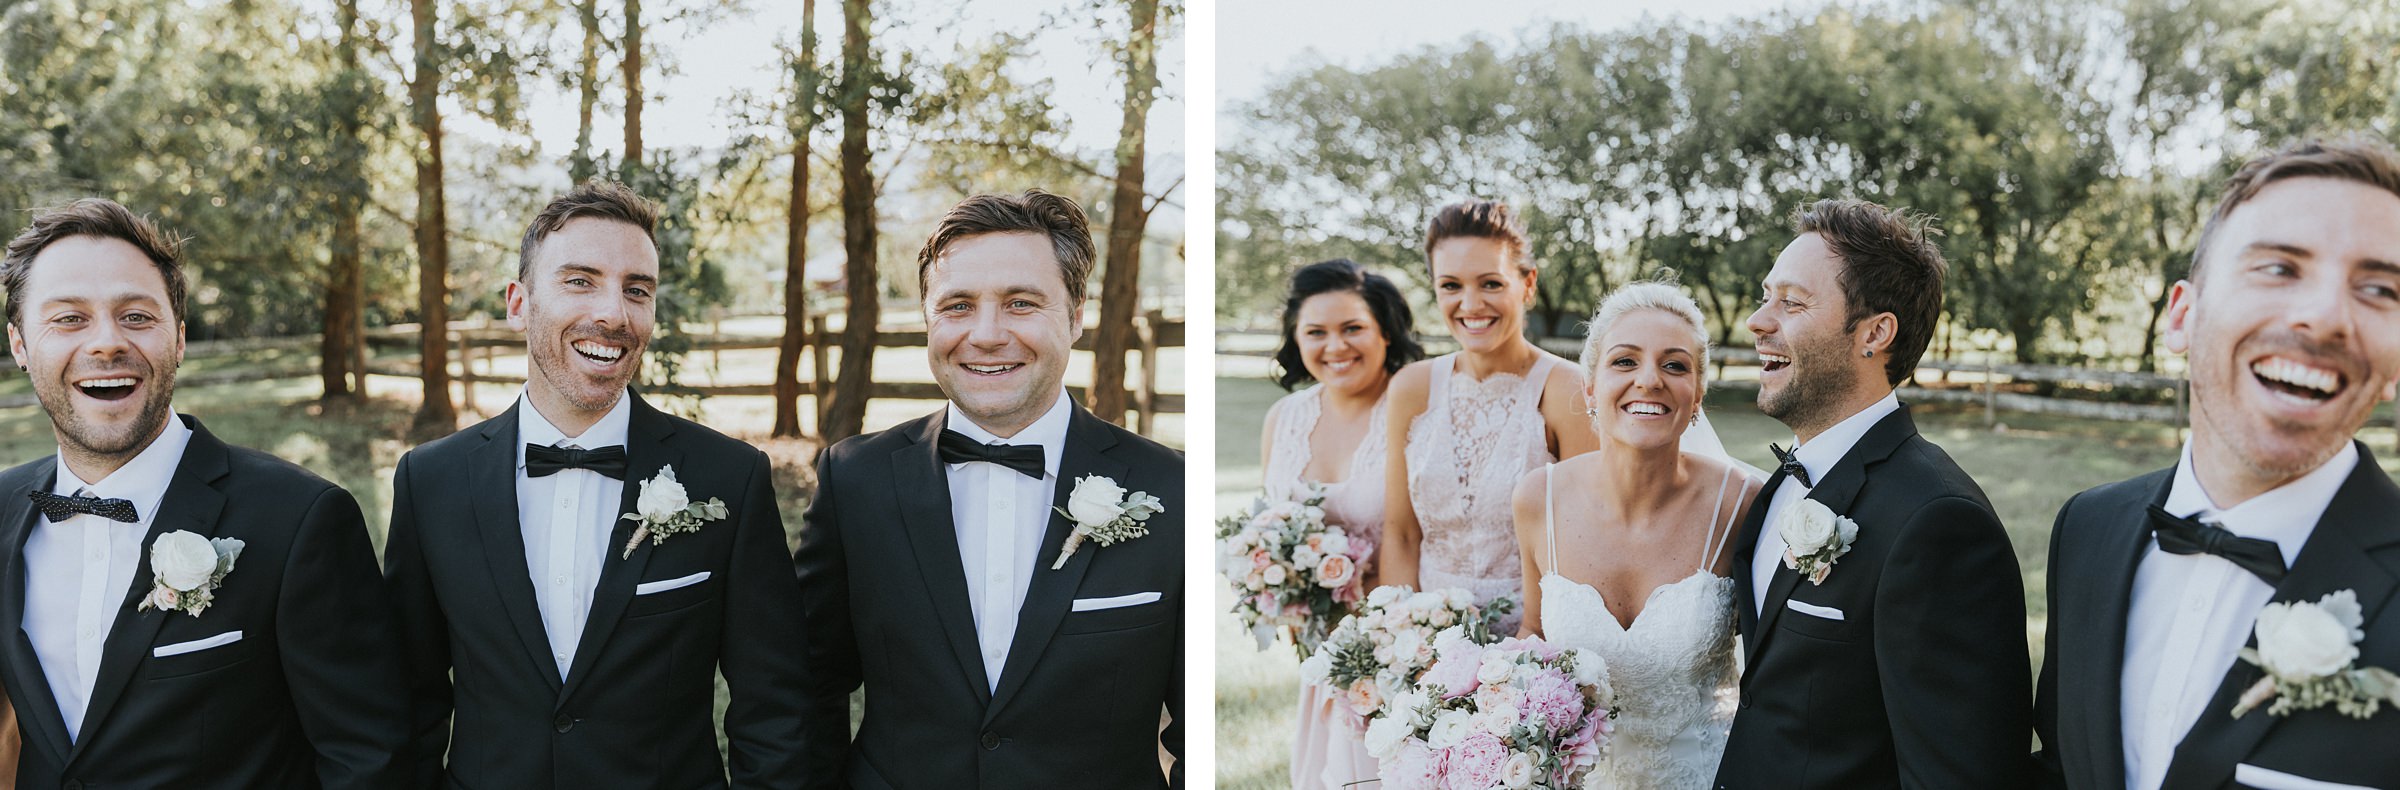 candid photos of the bridal party